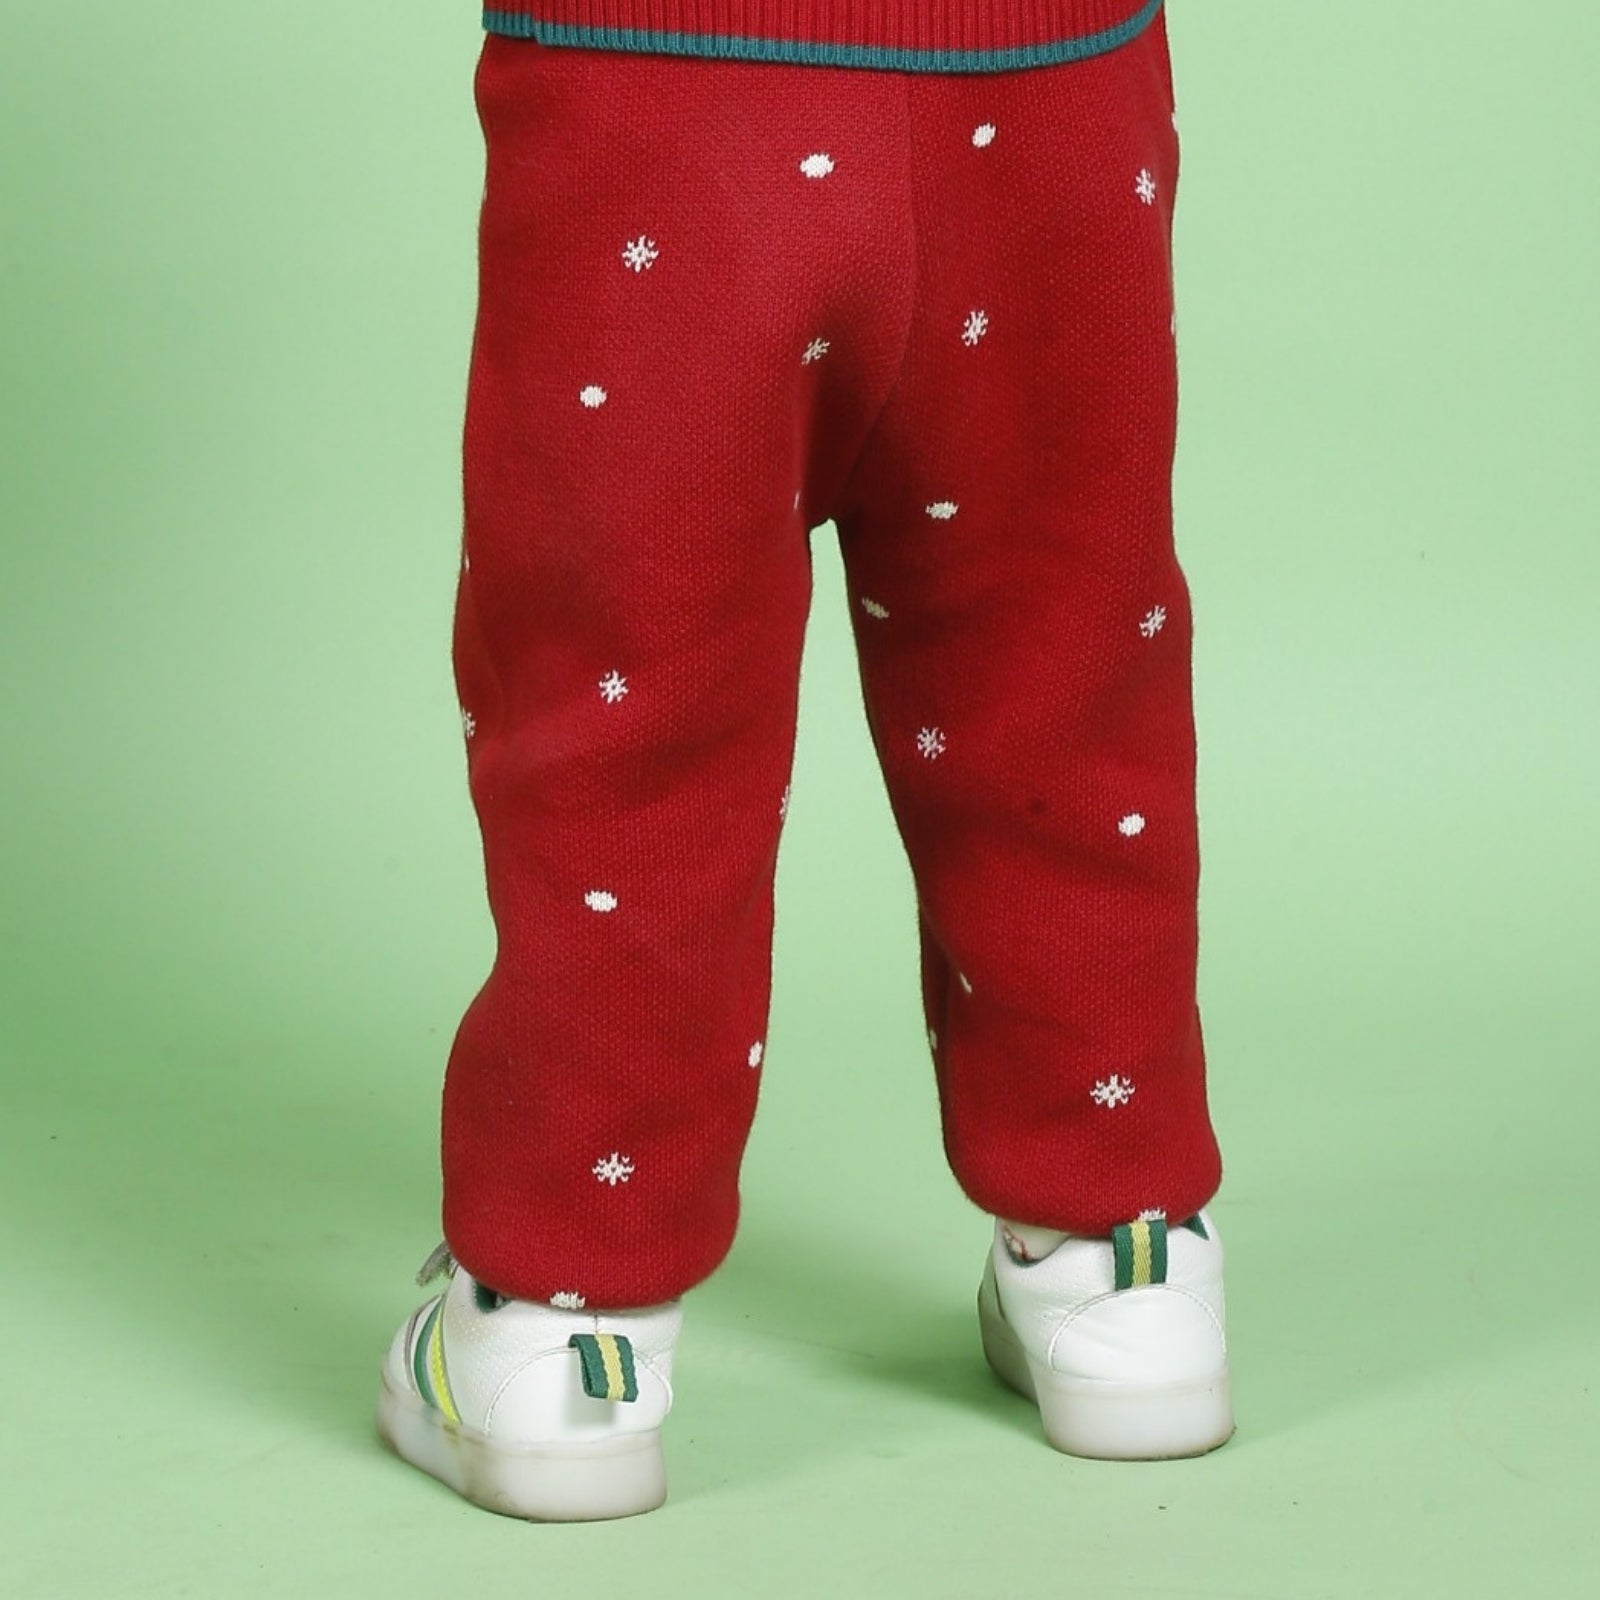 Greendeer Lighhearted 100% Cotton Reindeer Jacquard Sweater with Lower - Cherry Red Set of 2